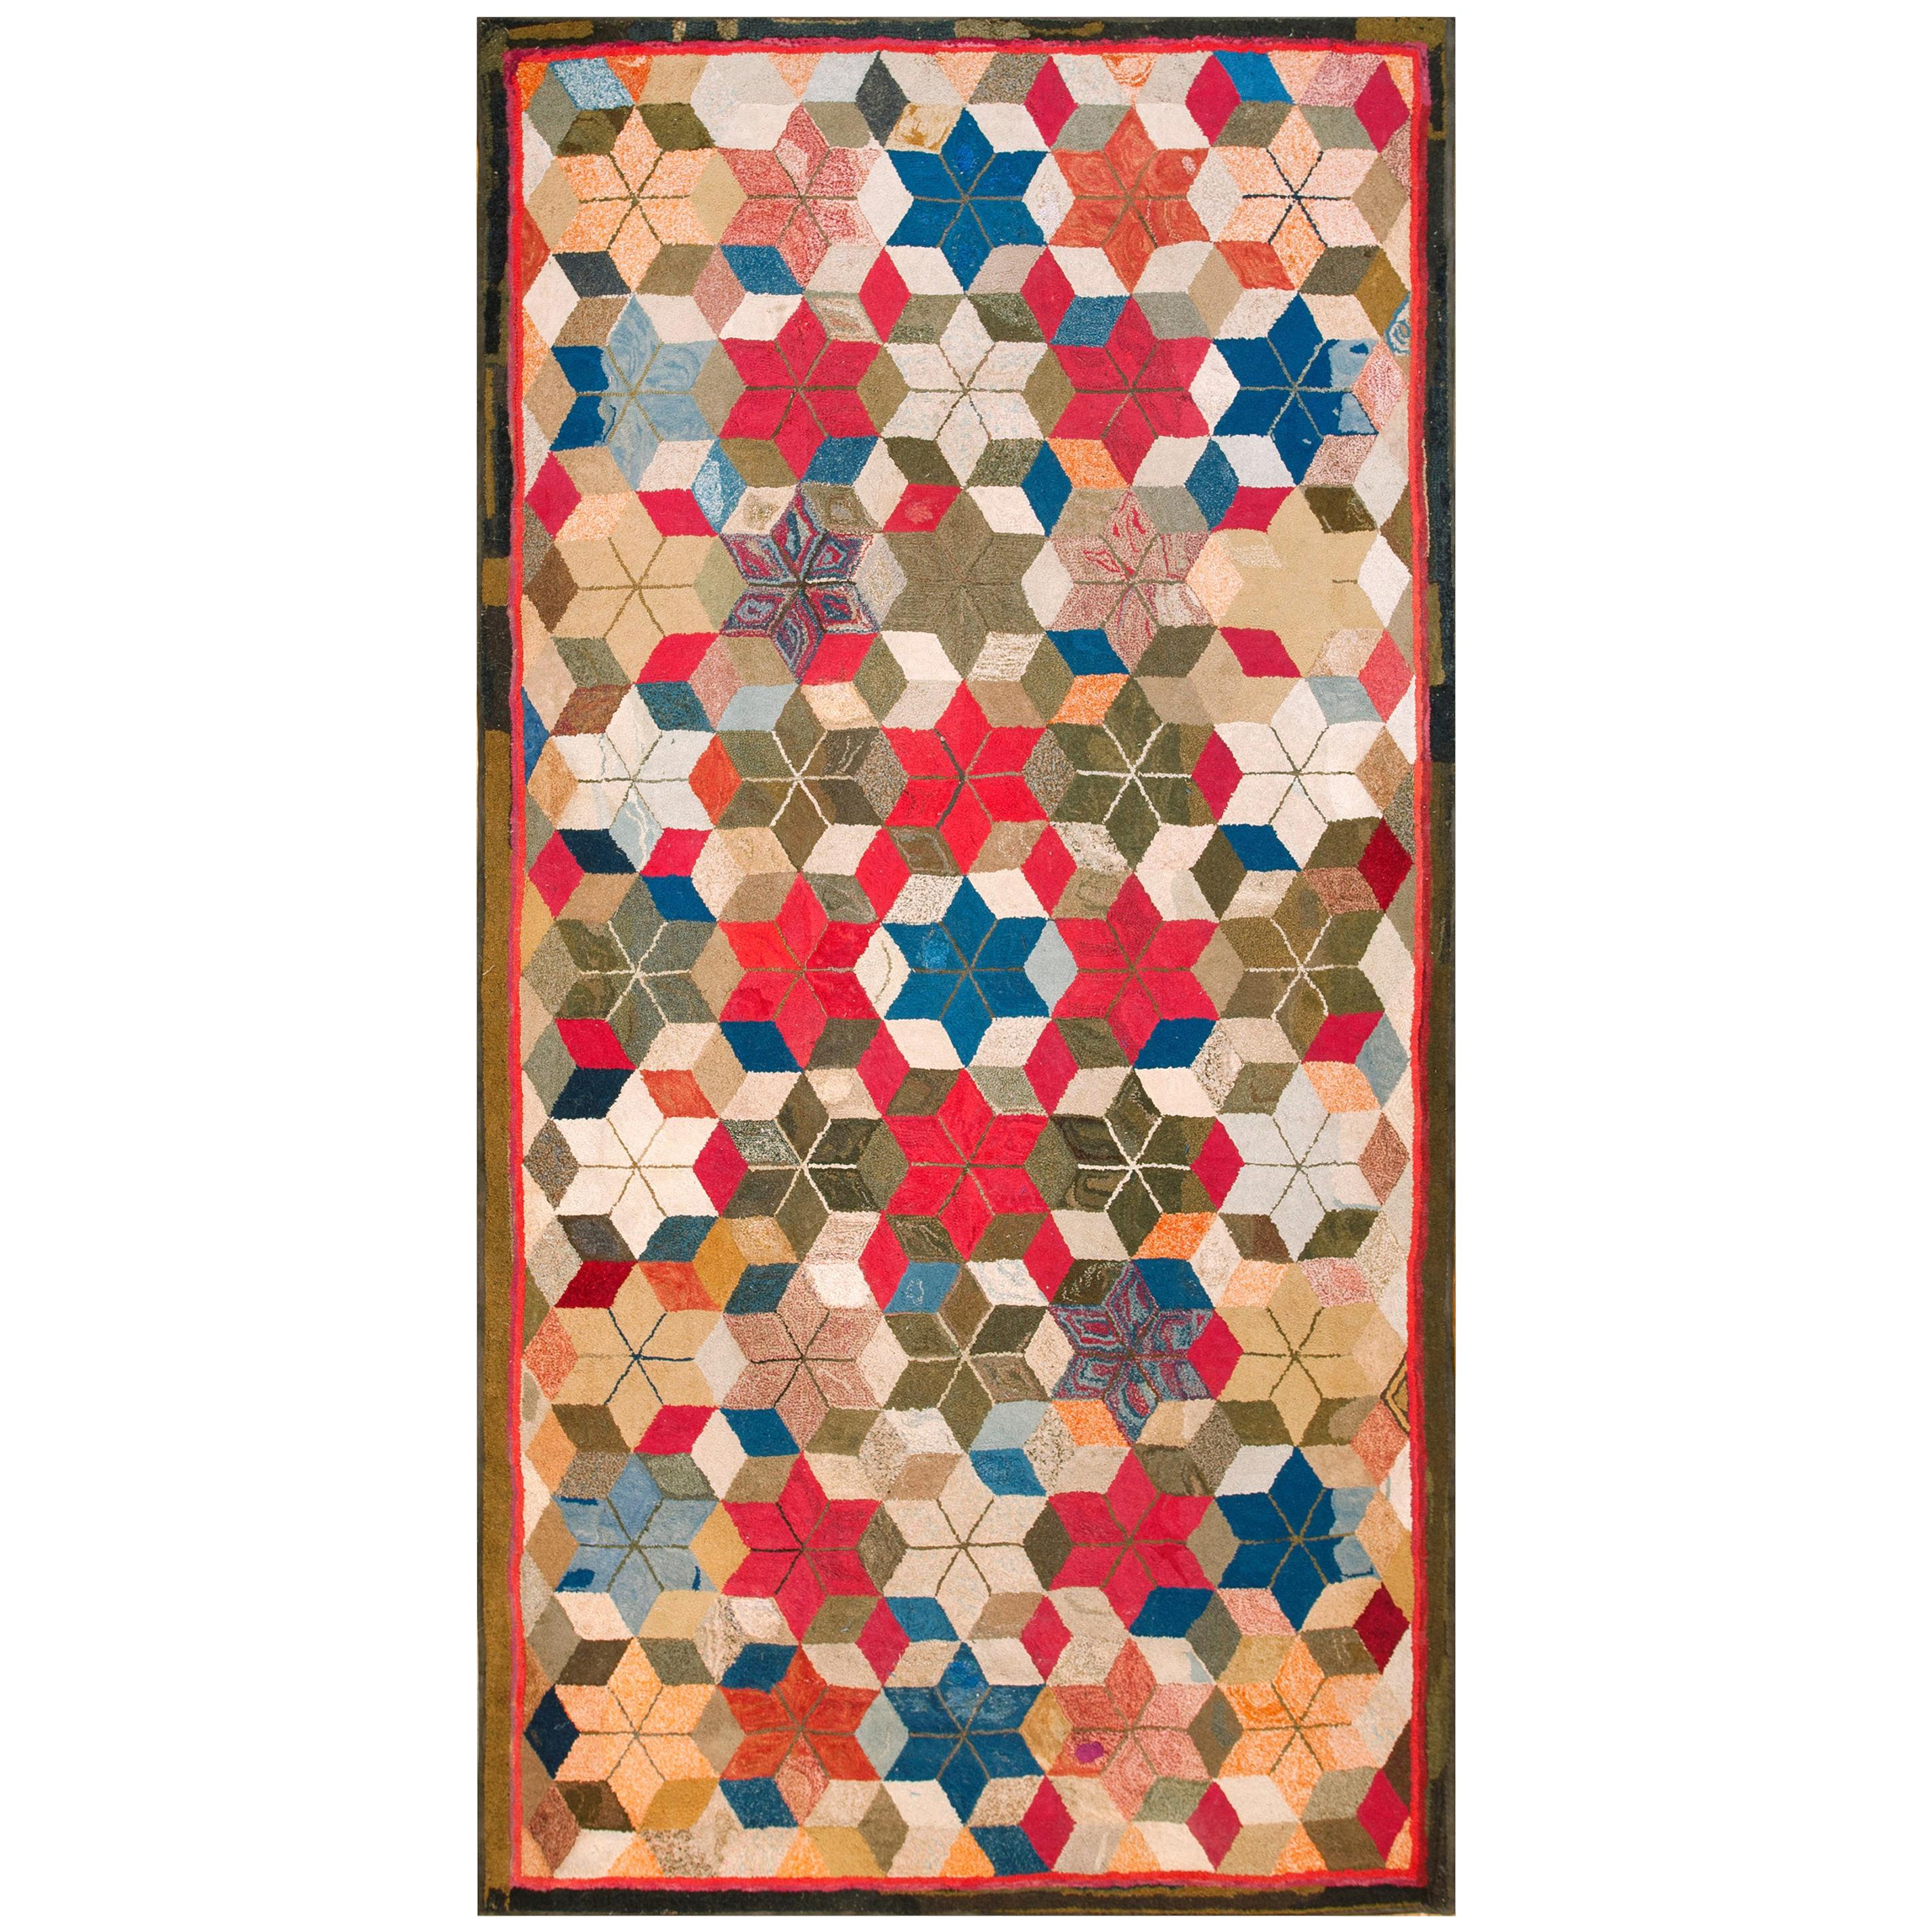 Early 20th Century American Hooked Rug ( 5'8" x 11' - 173 x 335 )